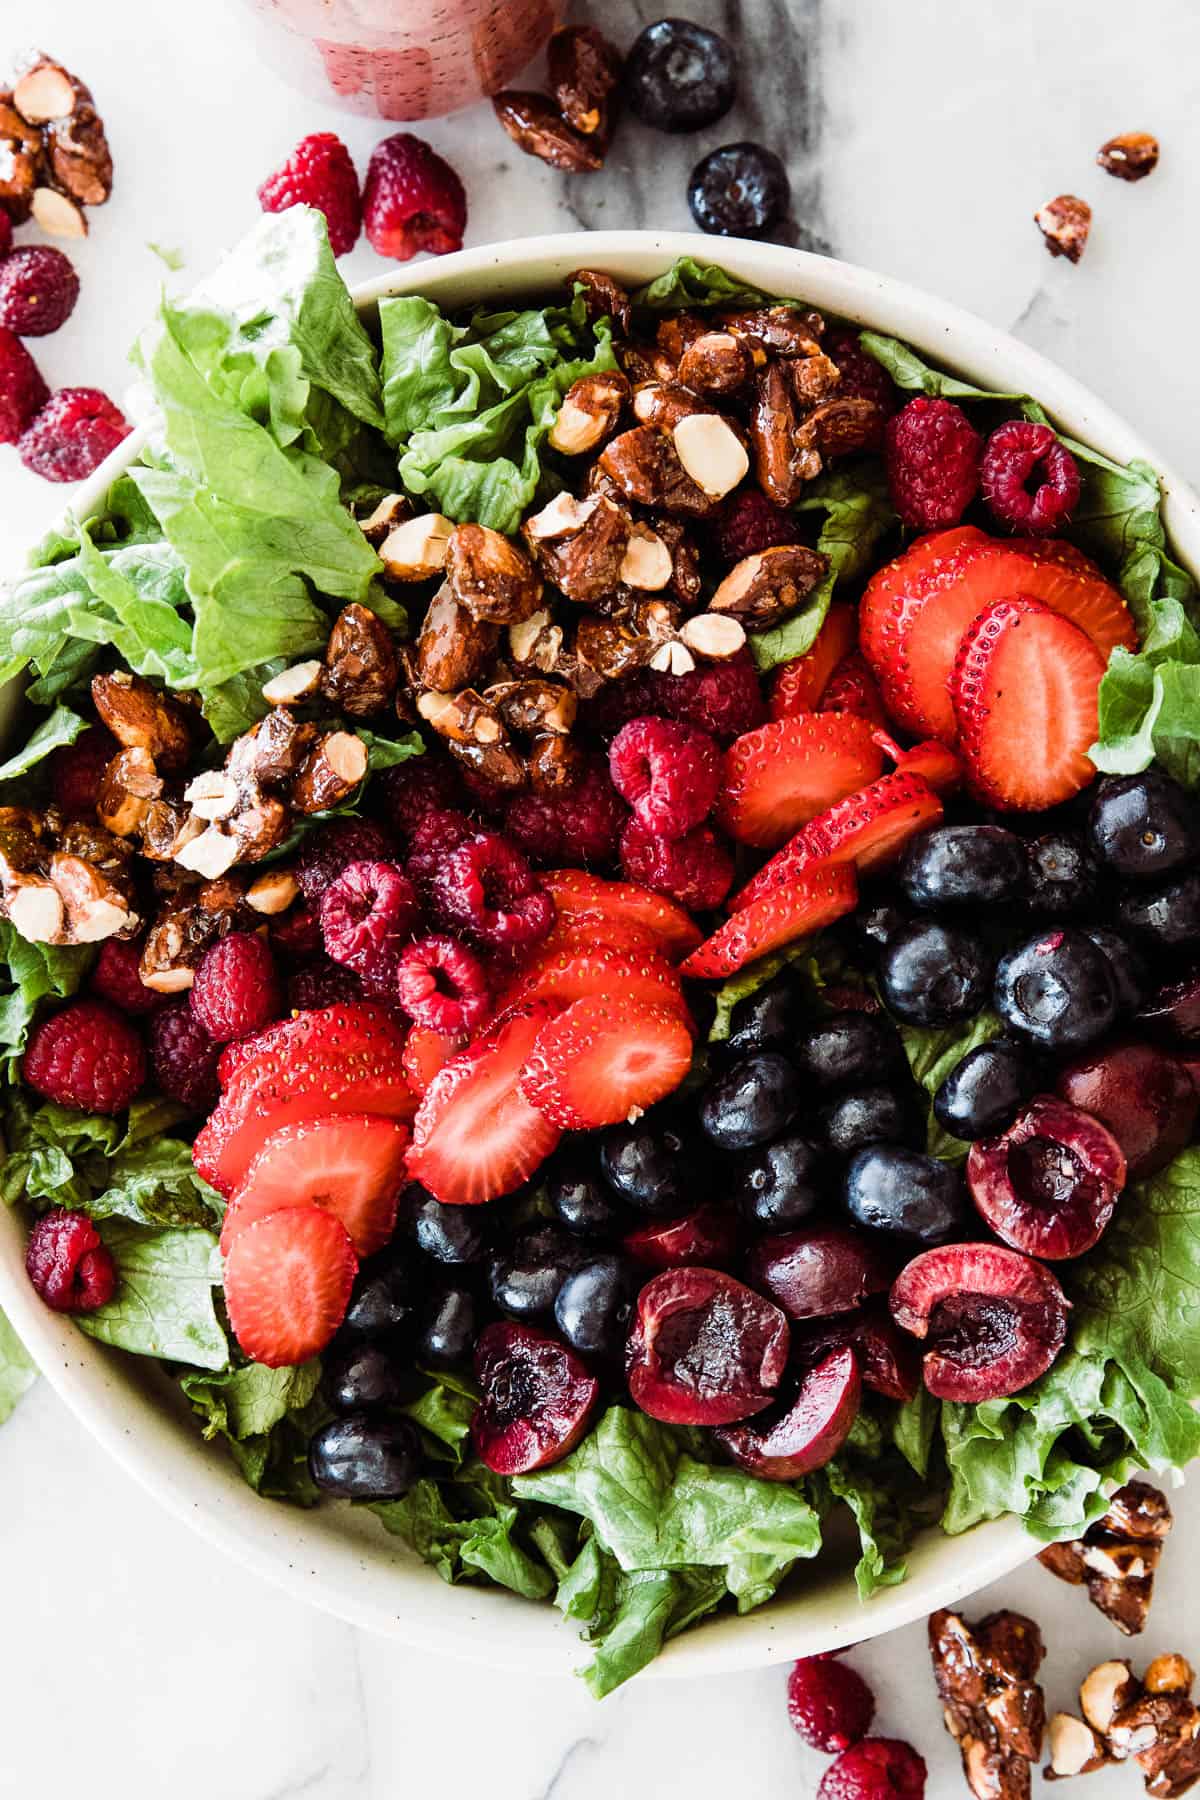 Large bowl of blue berry salad full of lettuce, almonds, and variety of berries.